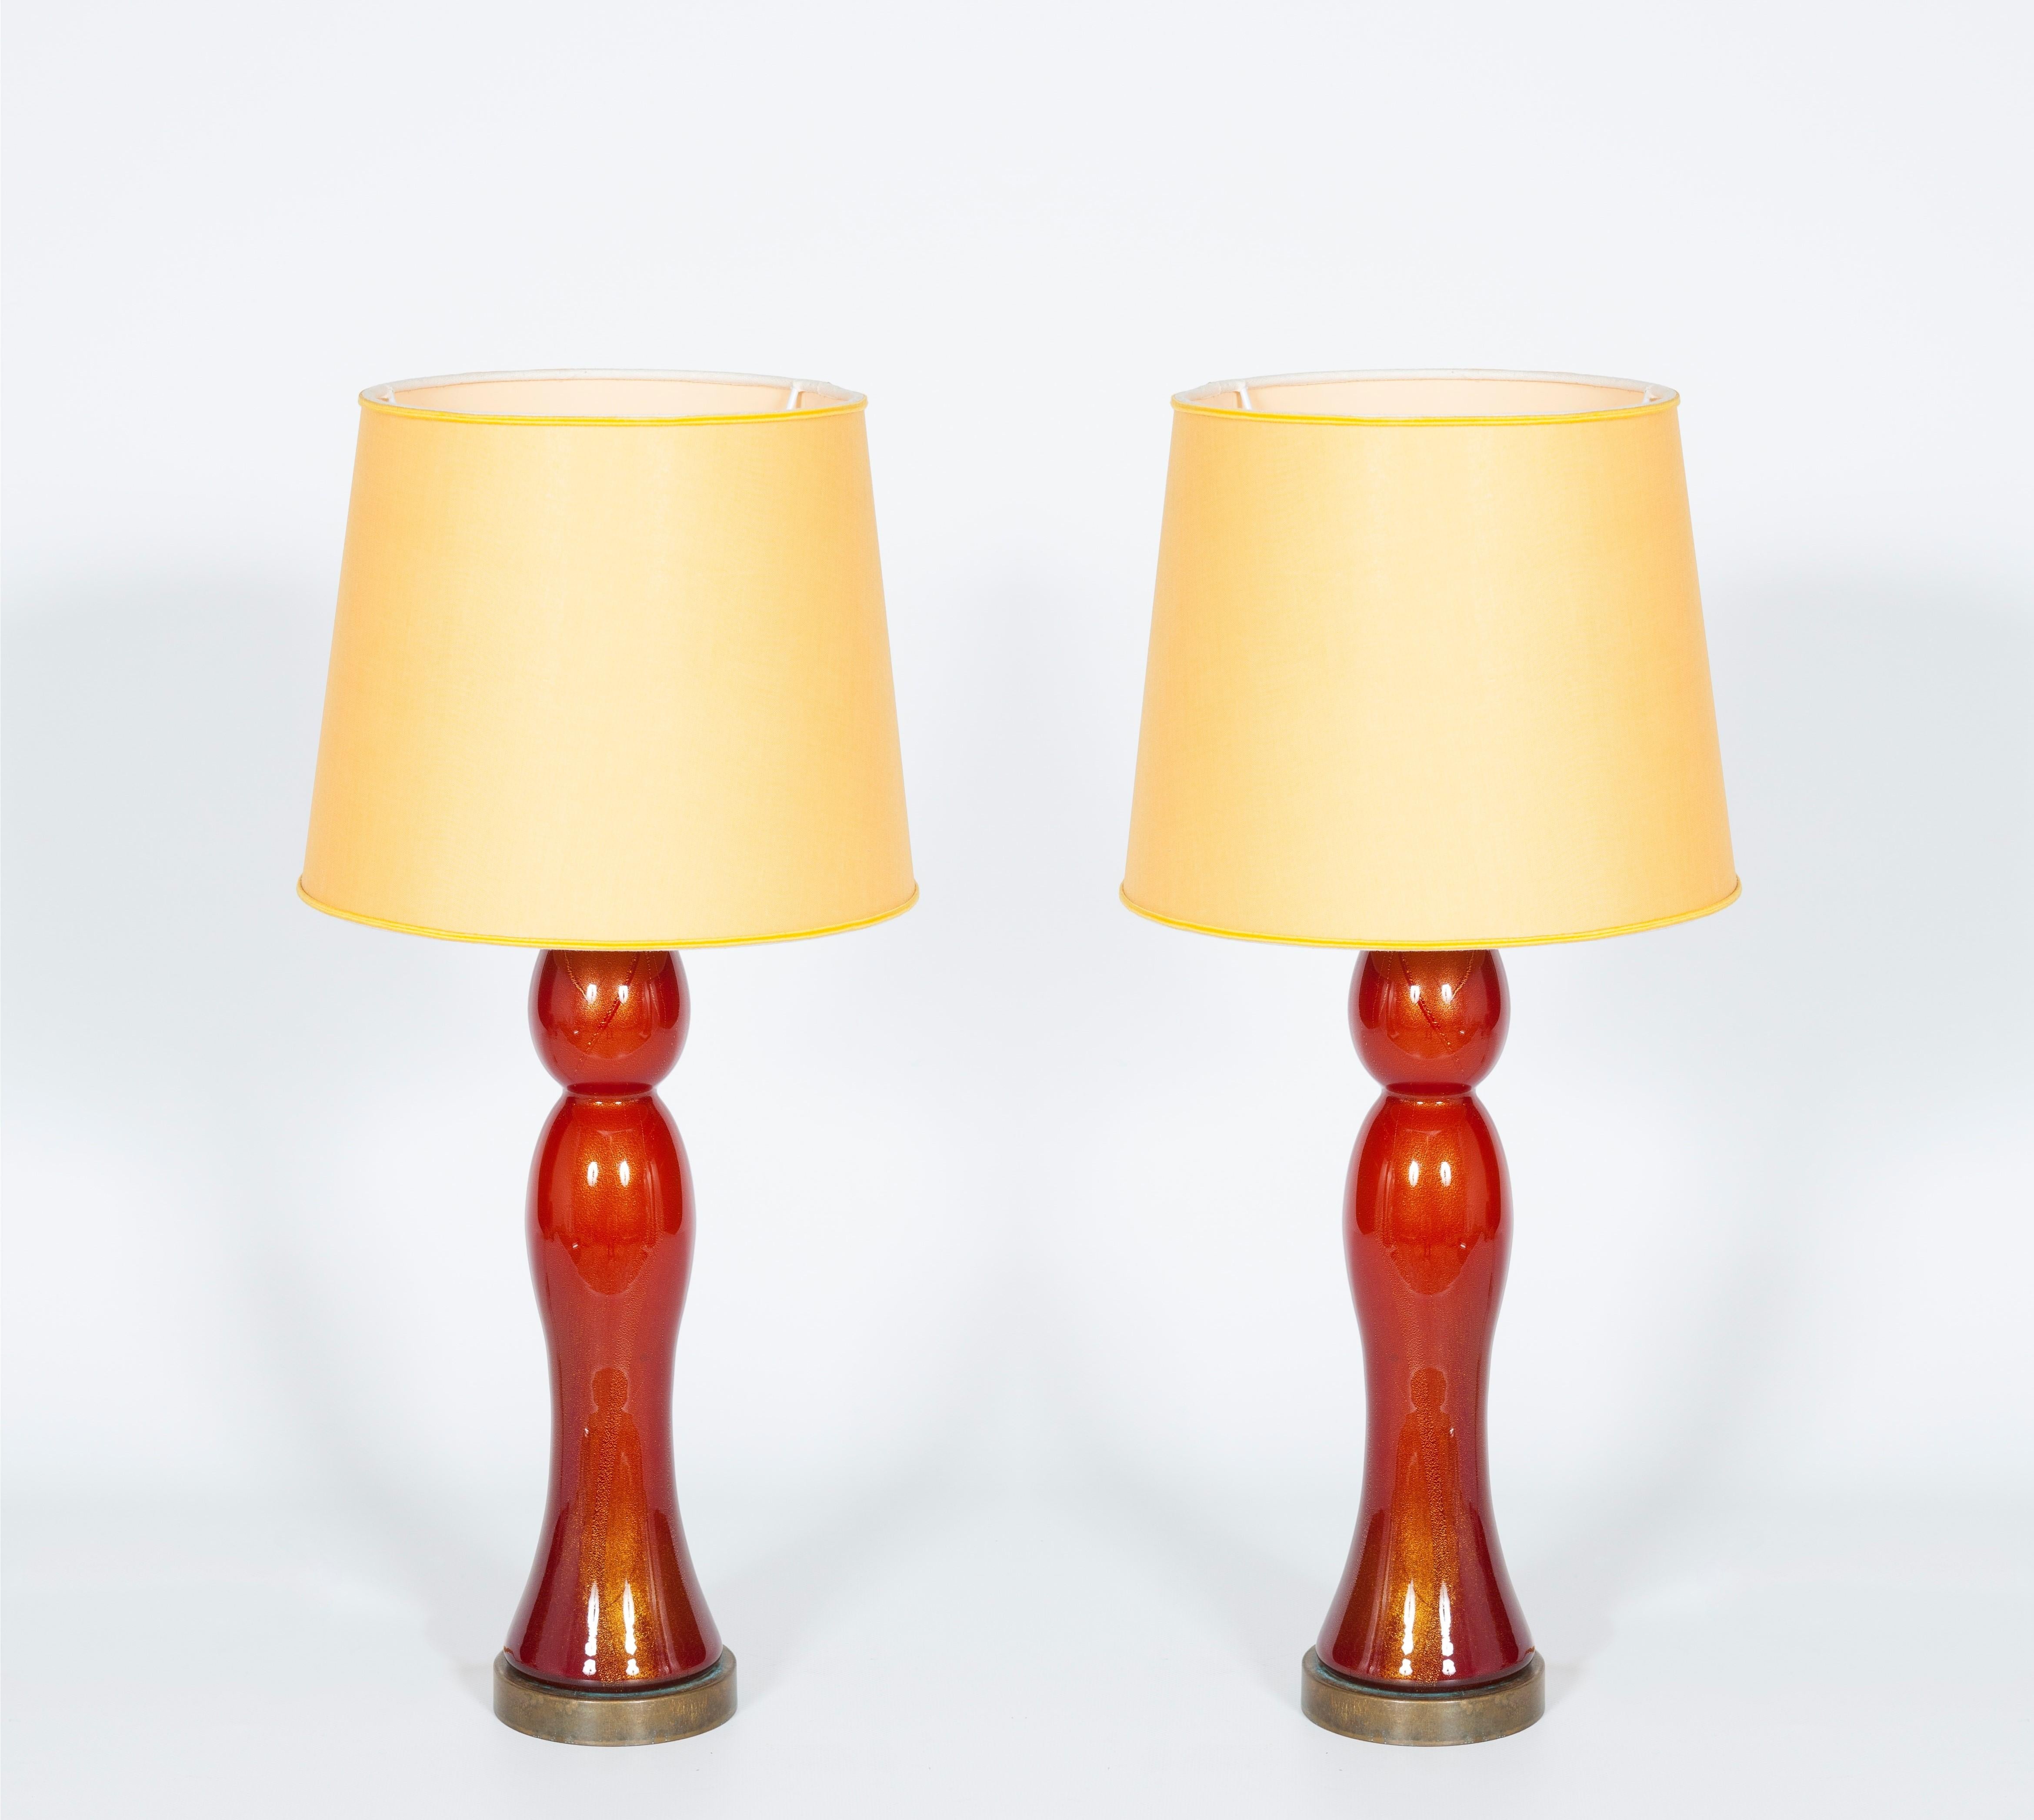 Pair of Murano Glass Table Lamps Coral and Gold Leaf Color, 1980s For Sale 4